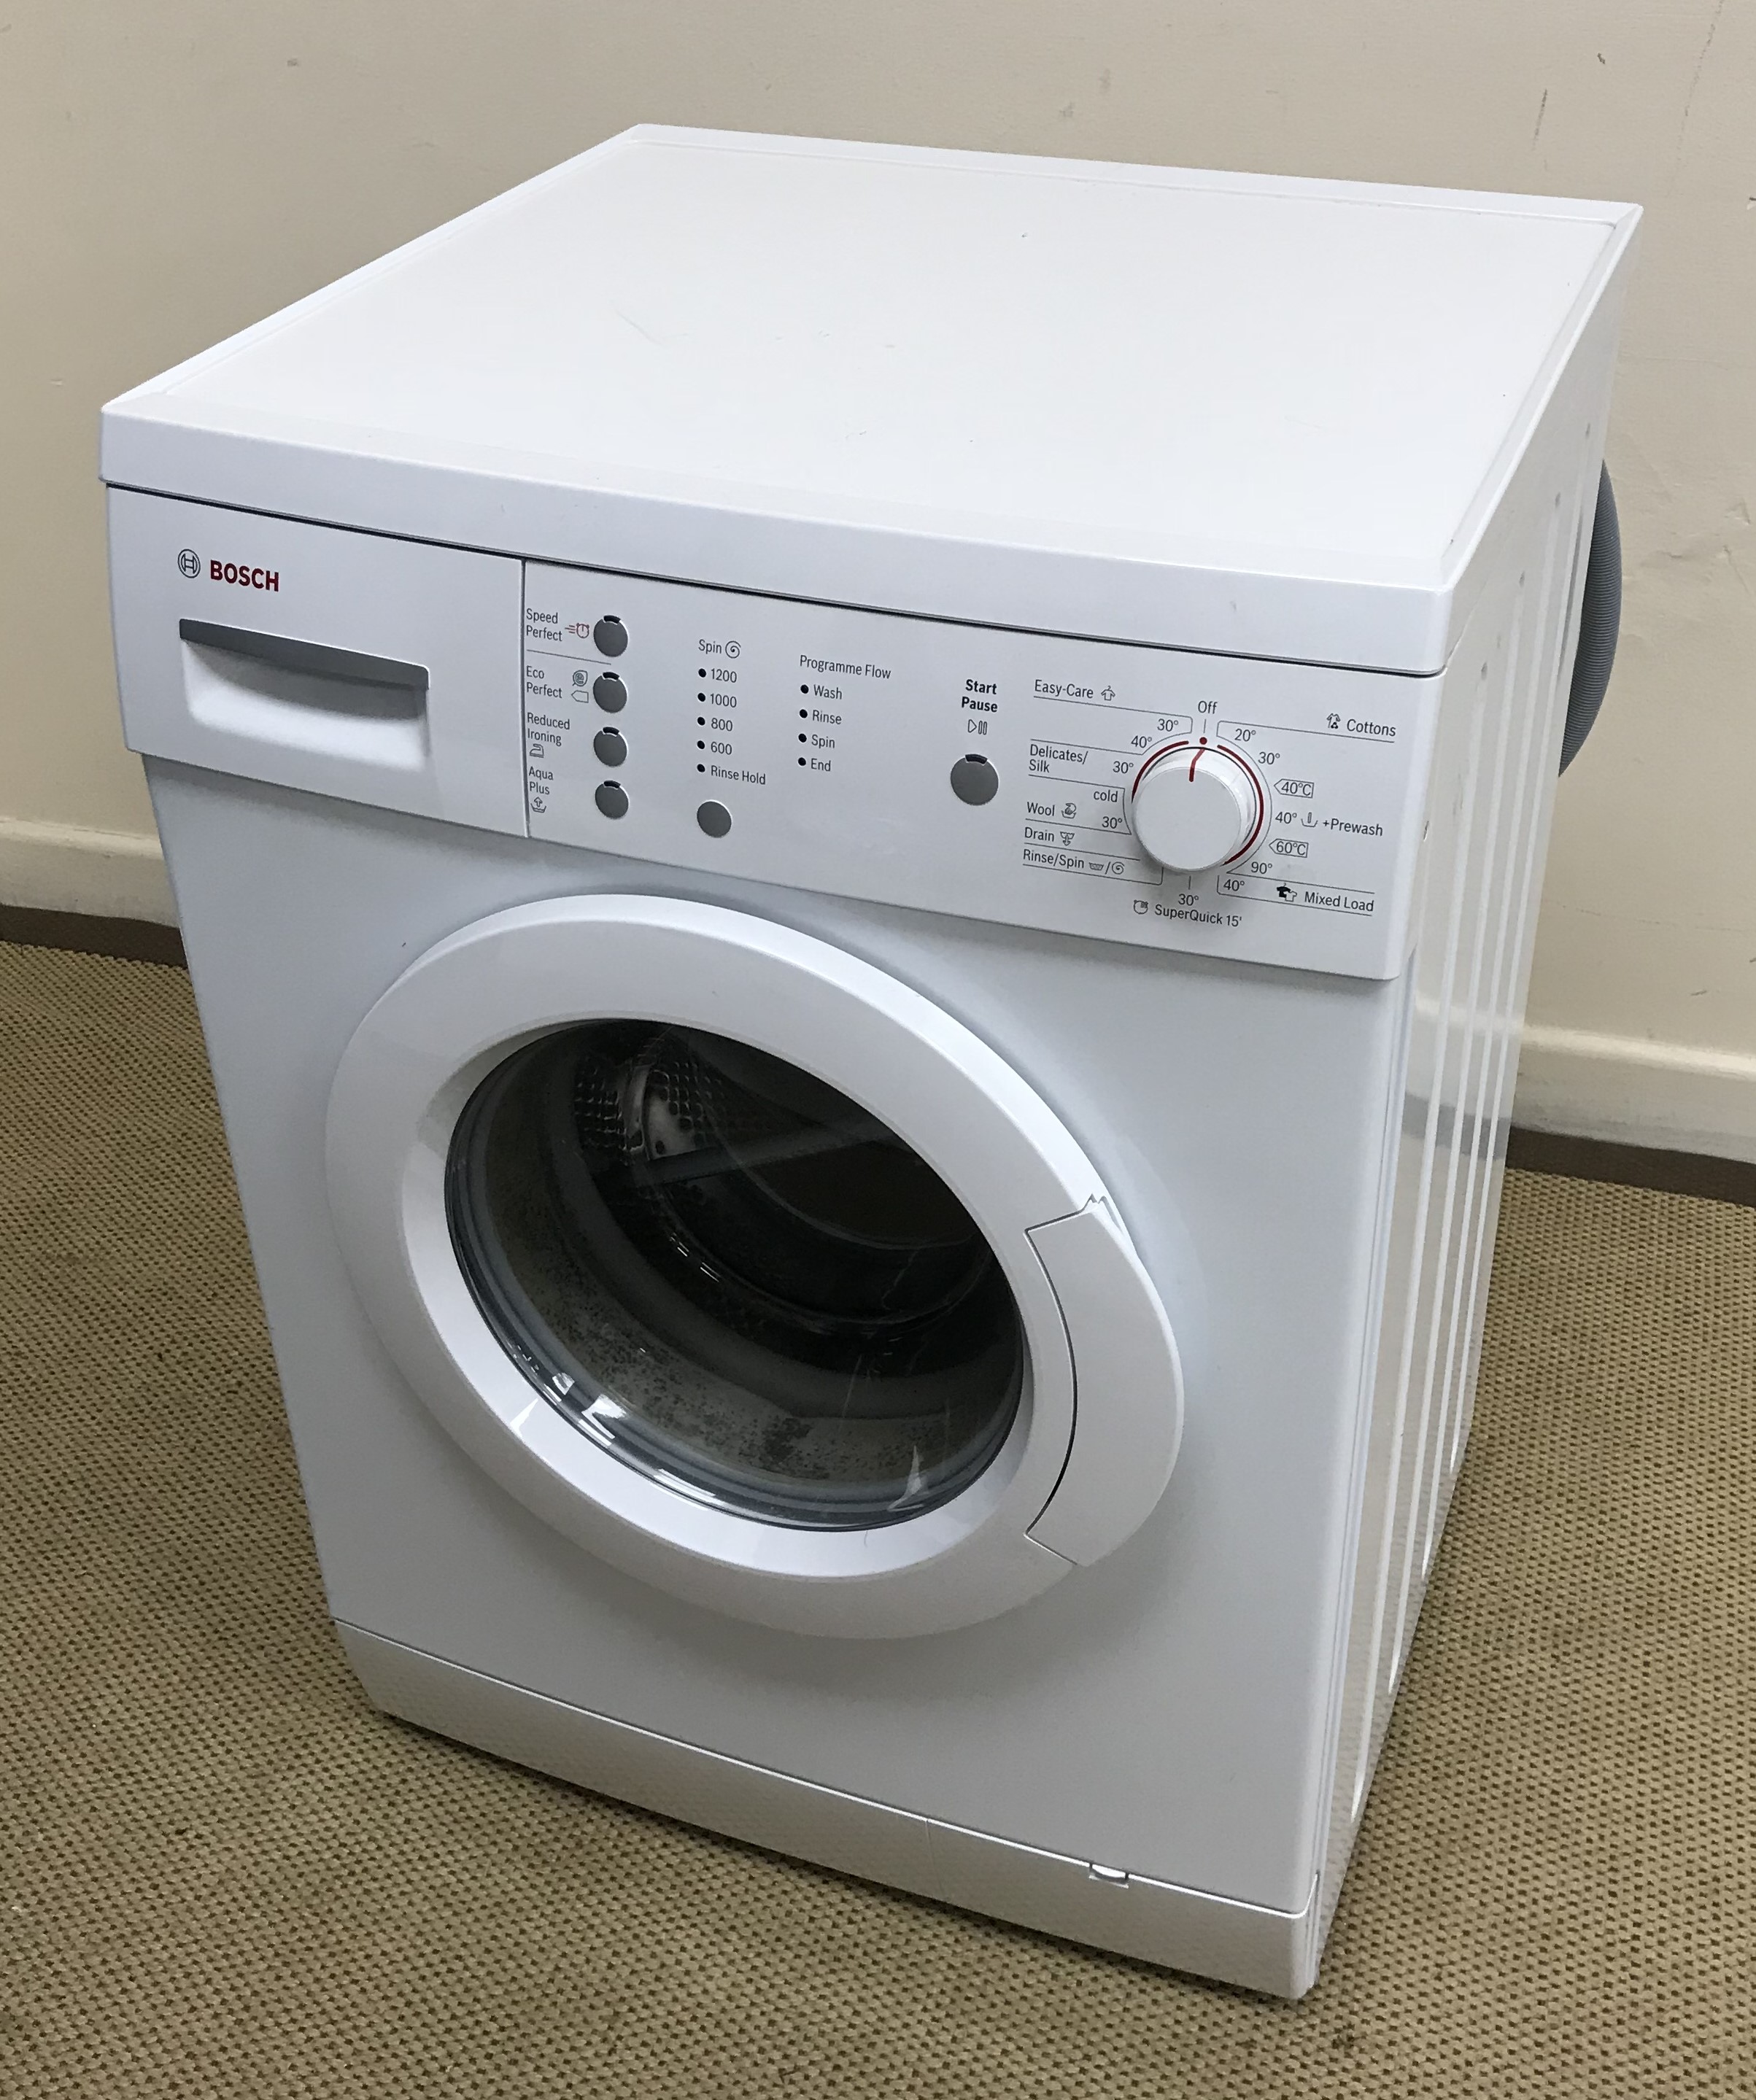 A Bosch washing machine together with a Hotpoint Aquarius TCL780 tumble dryer (2) - Image 2 of 3